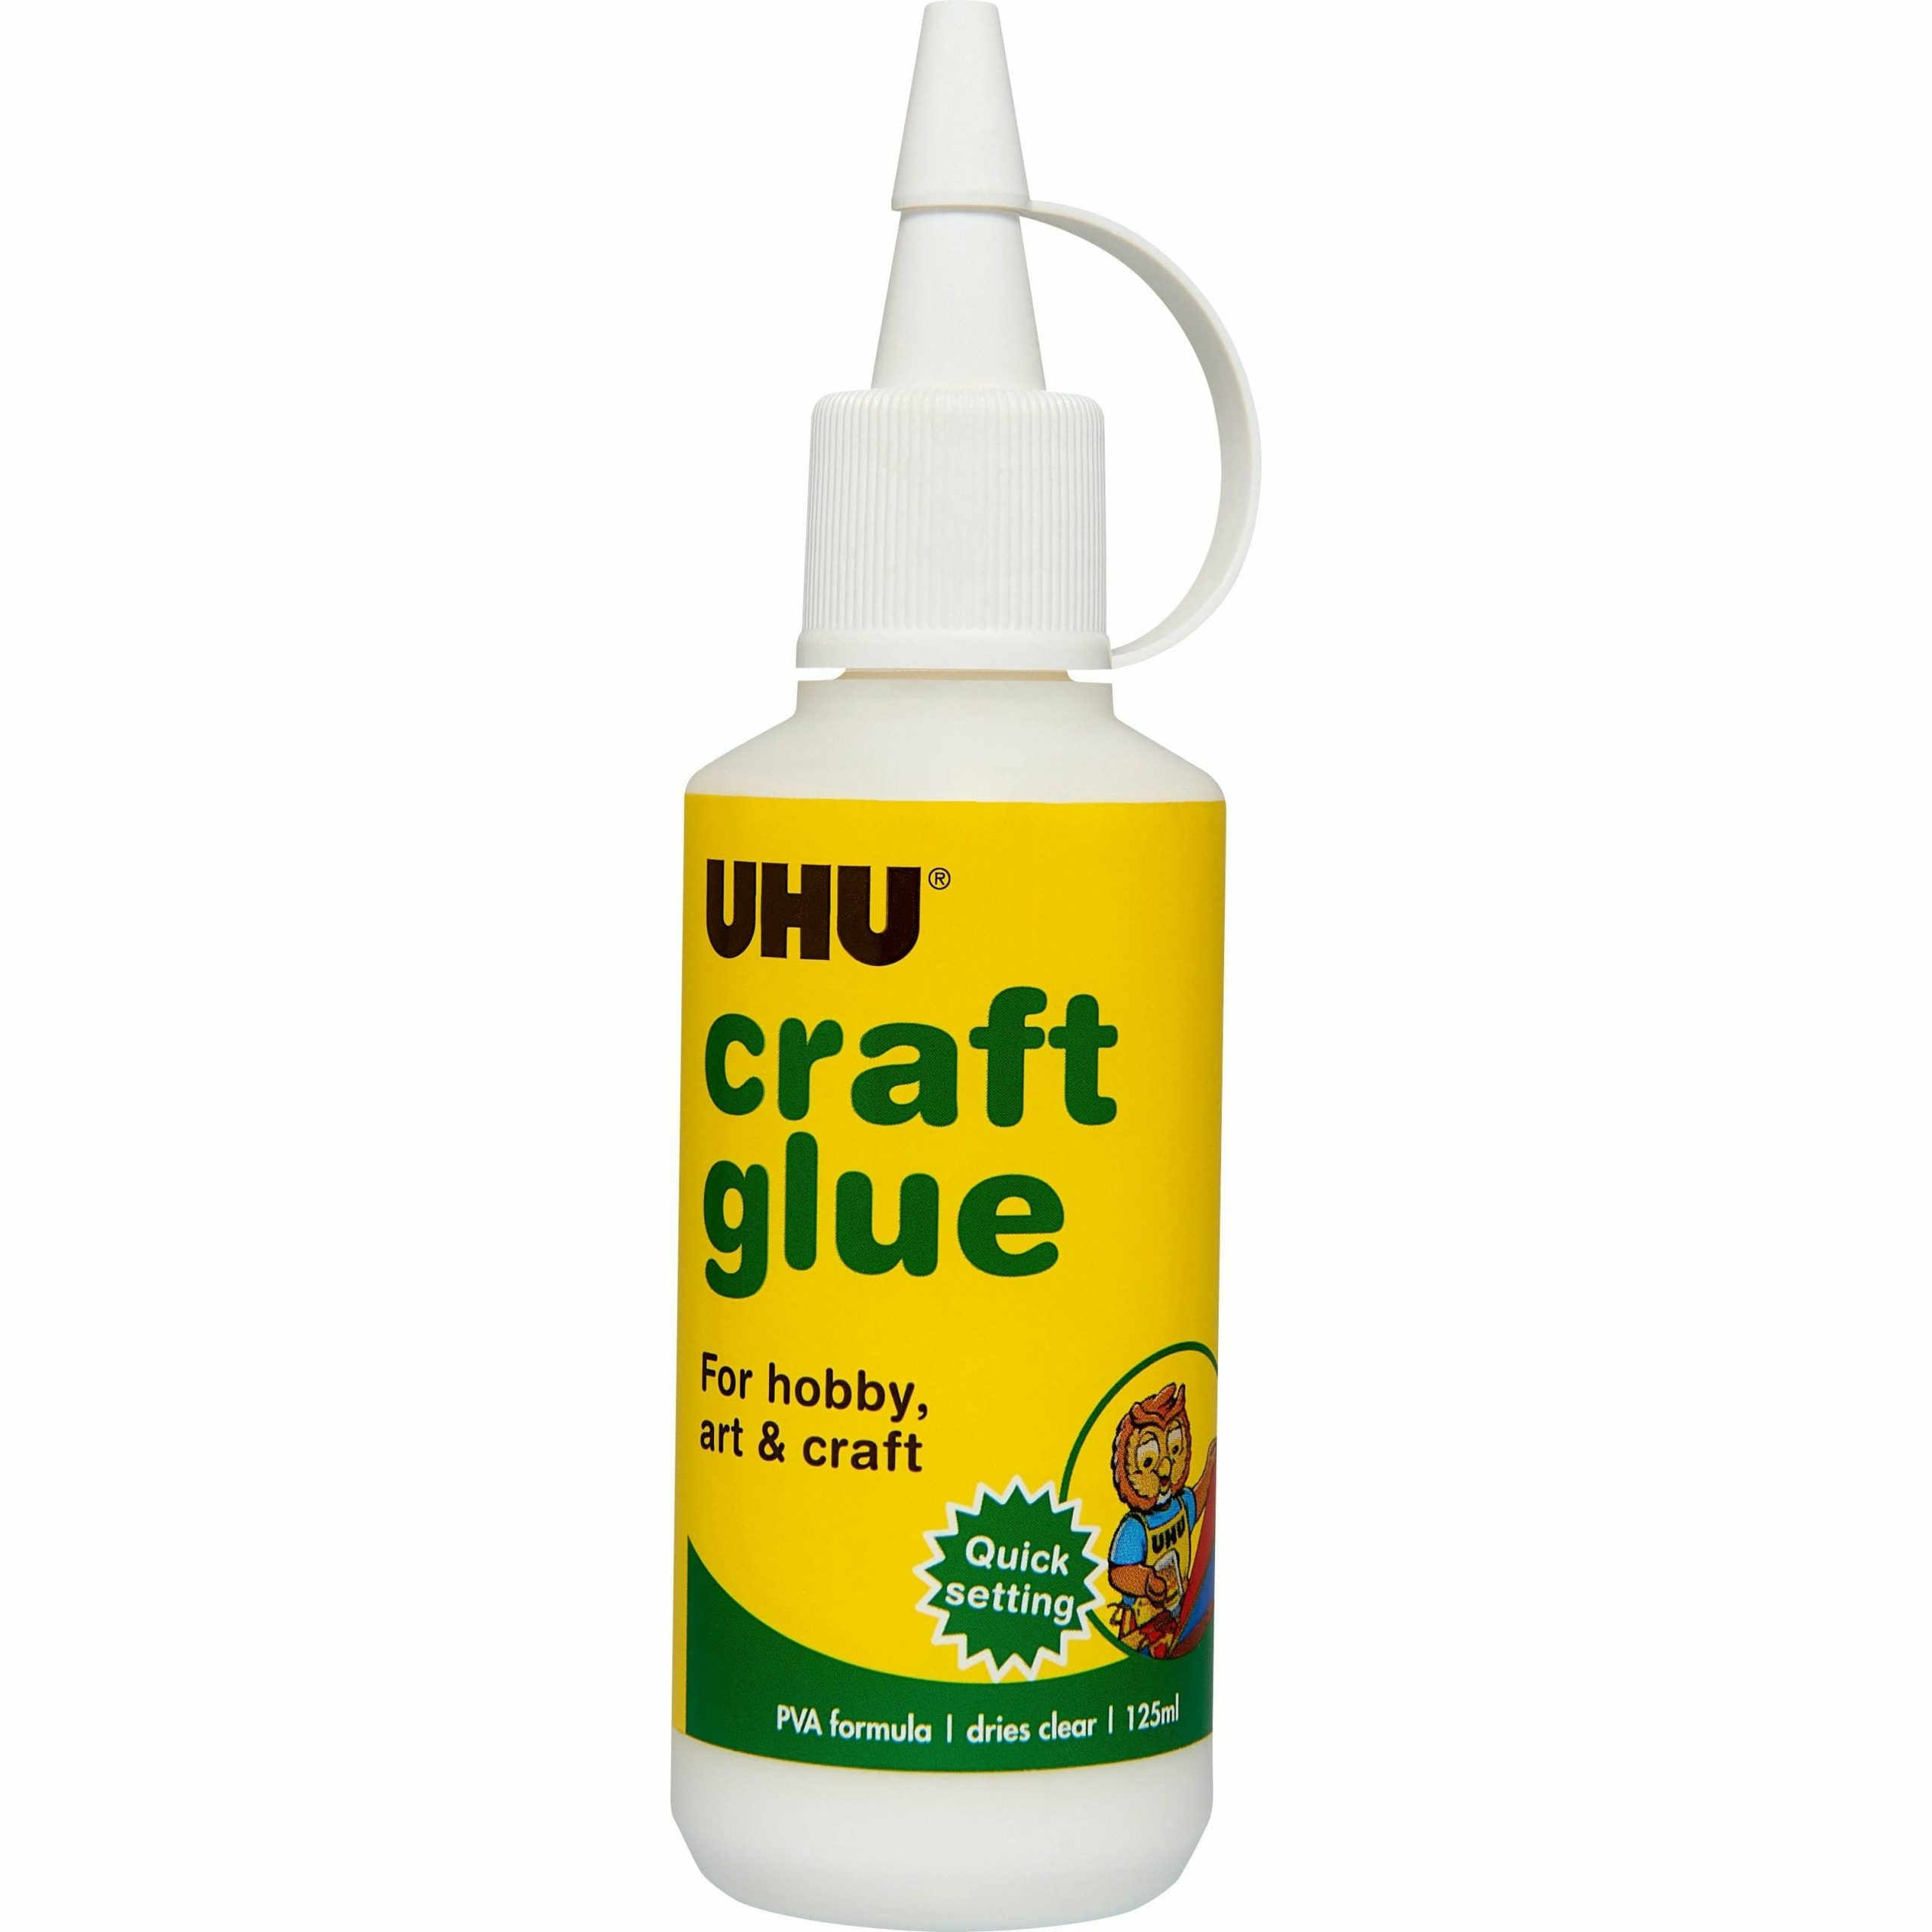 Find your UHU Craft Glue 125ml 159 and Shop Now